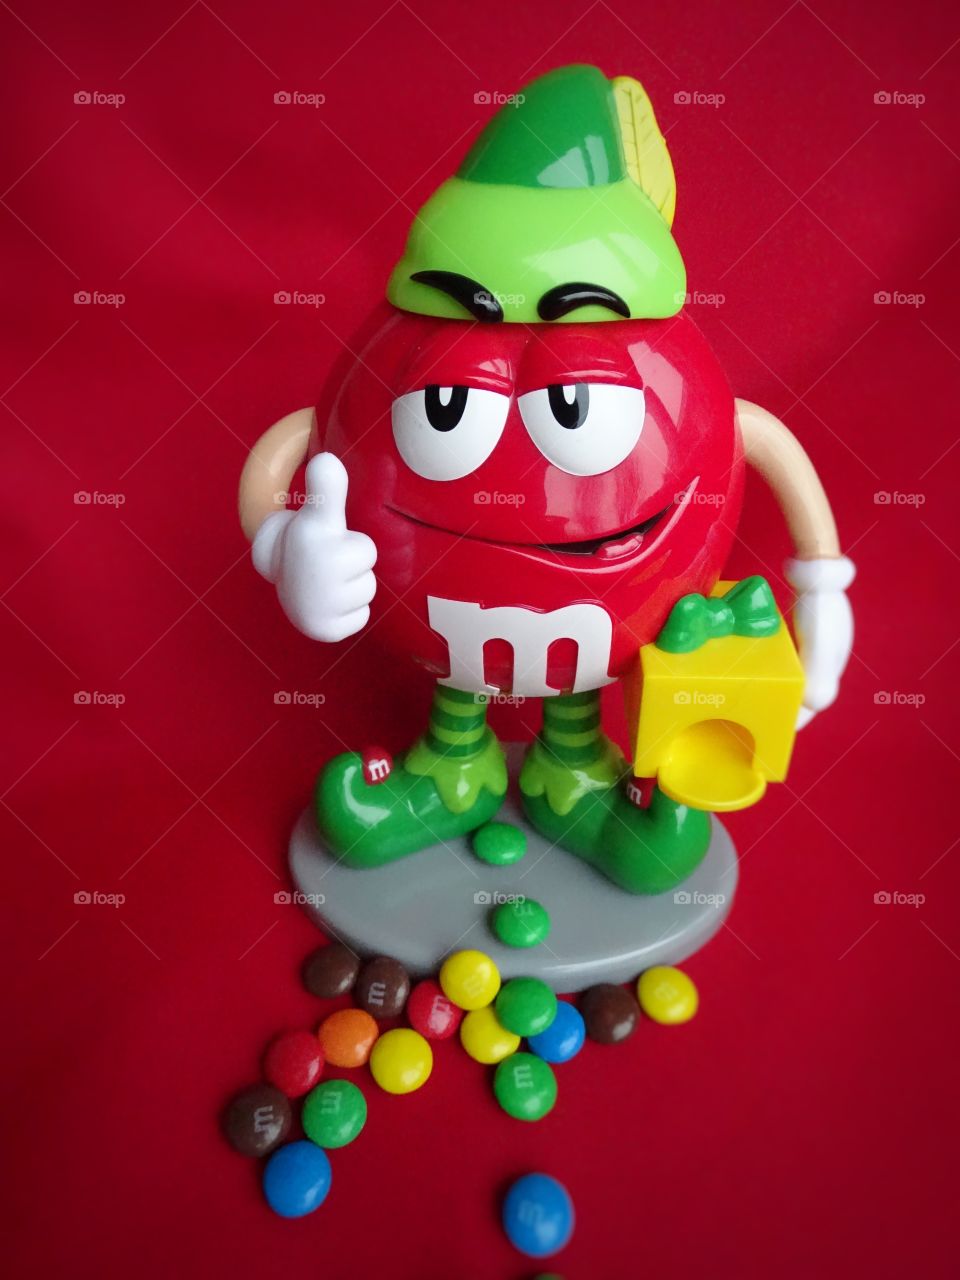 Thumbs up for M&M’s 